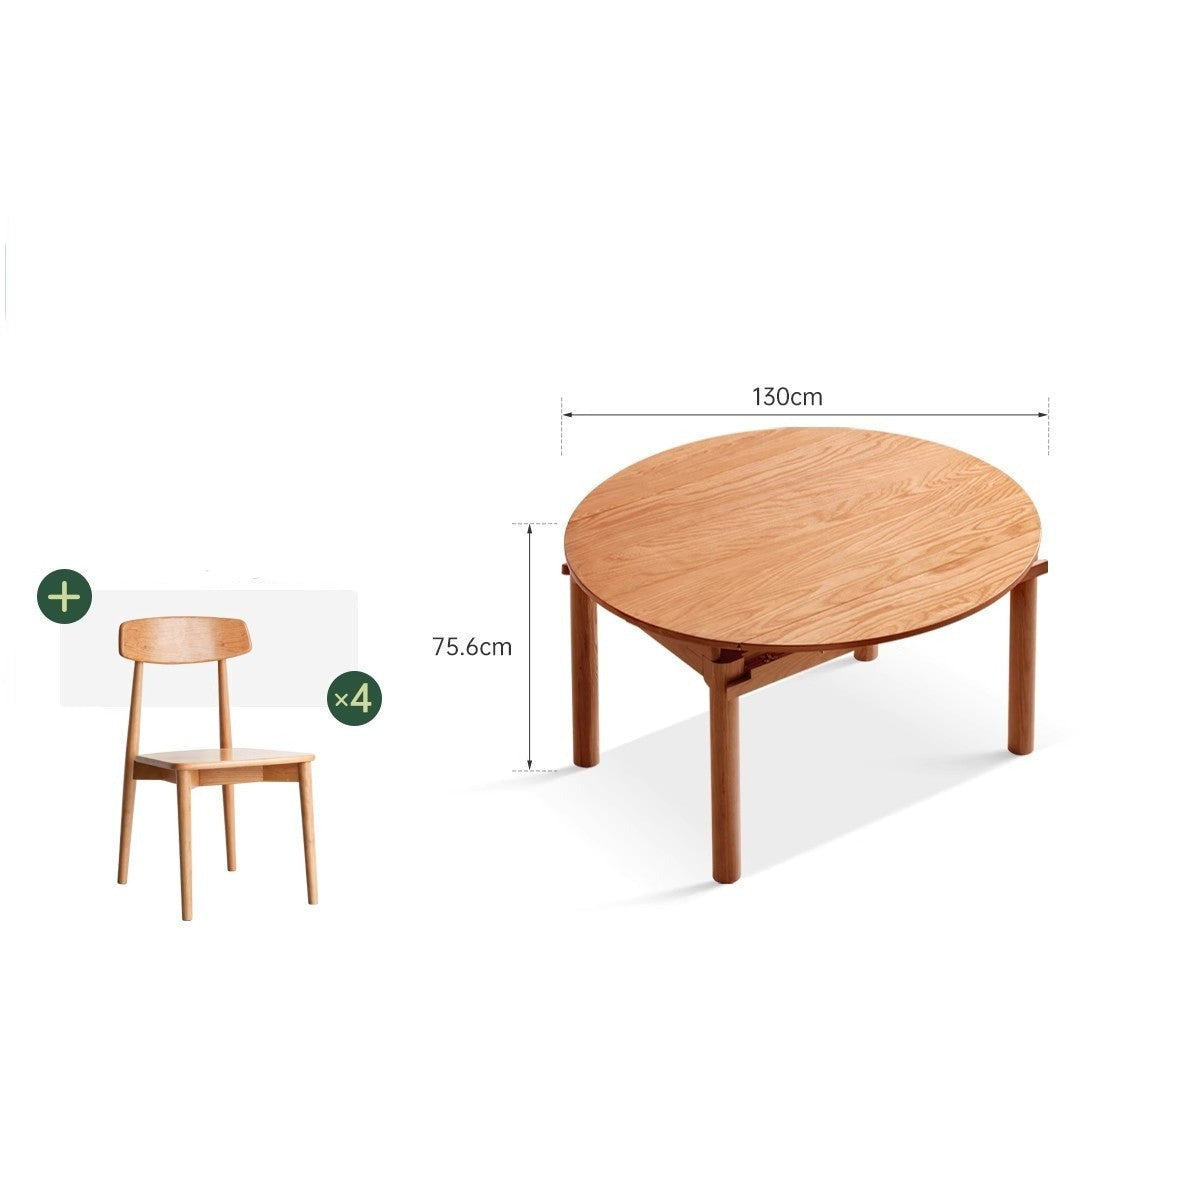 Retractable folding cherry wood round table )